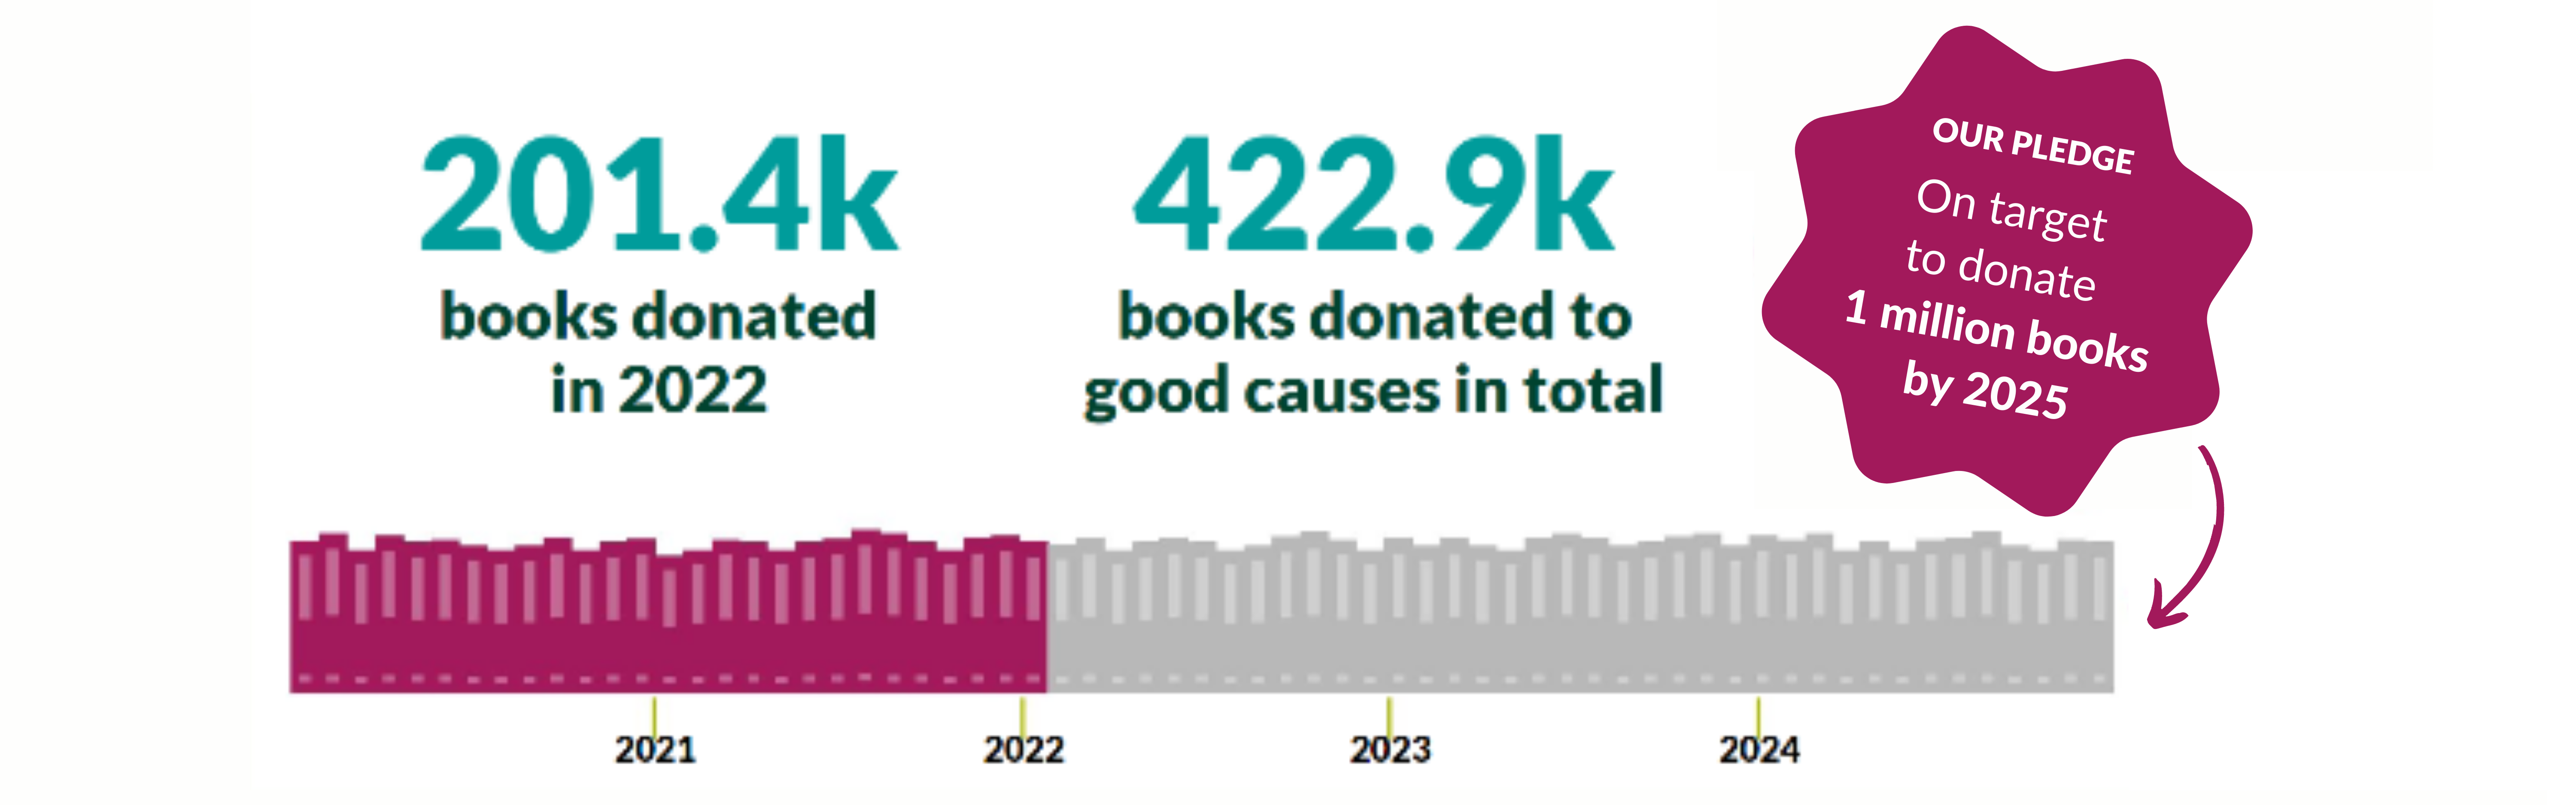 201.4k books donated in 2022, 422.9k books donated to good causes in total